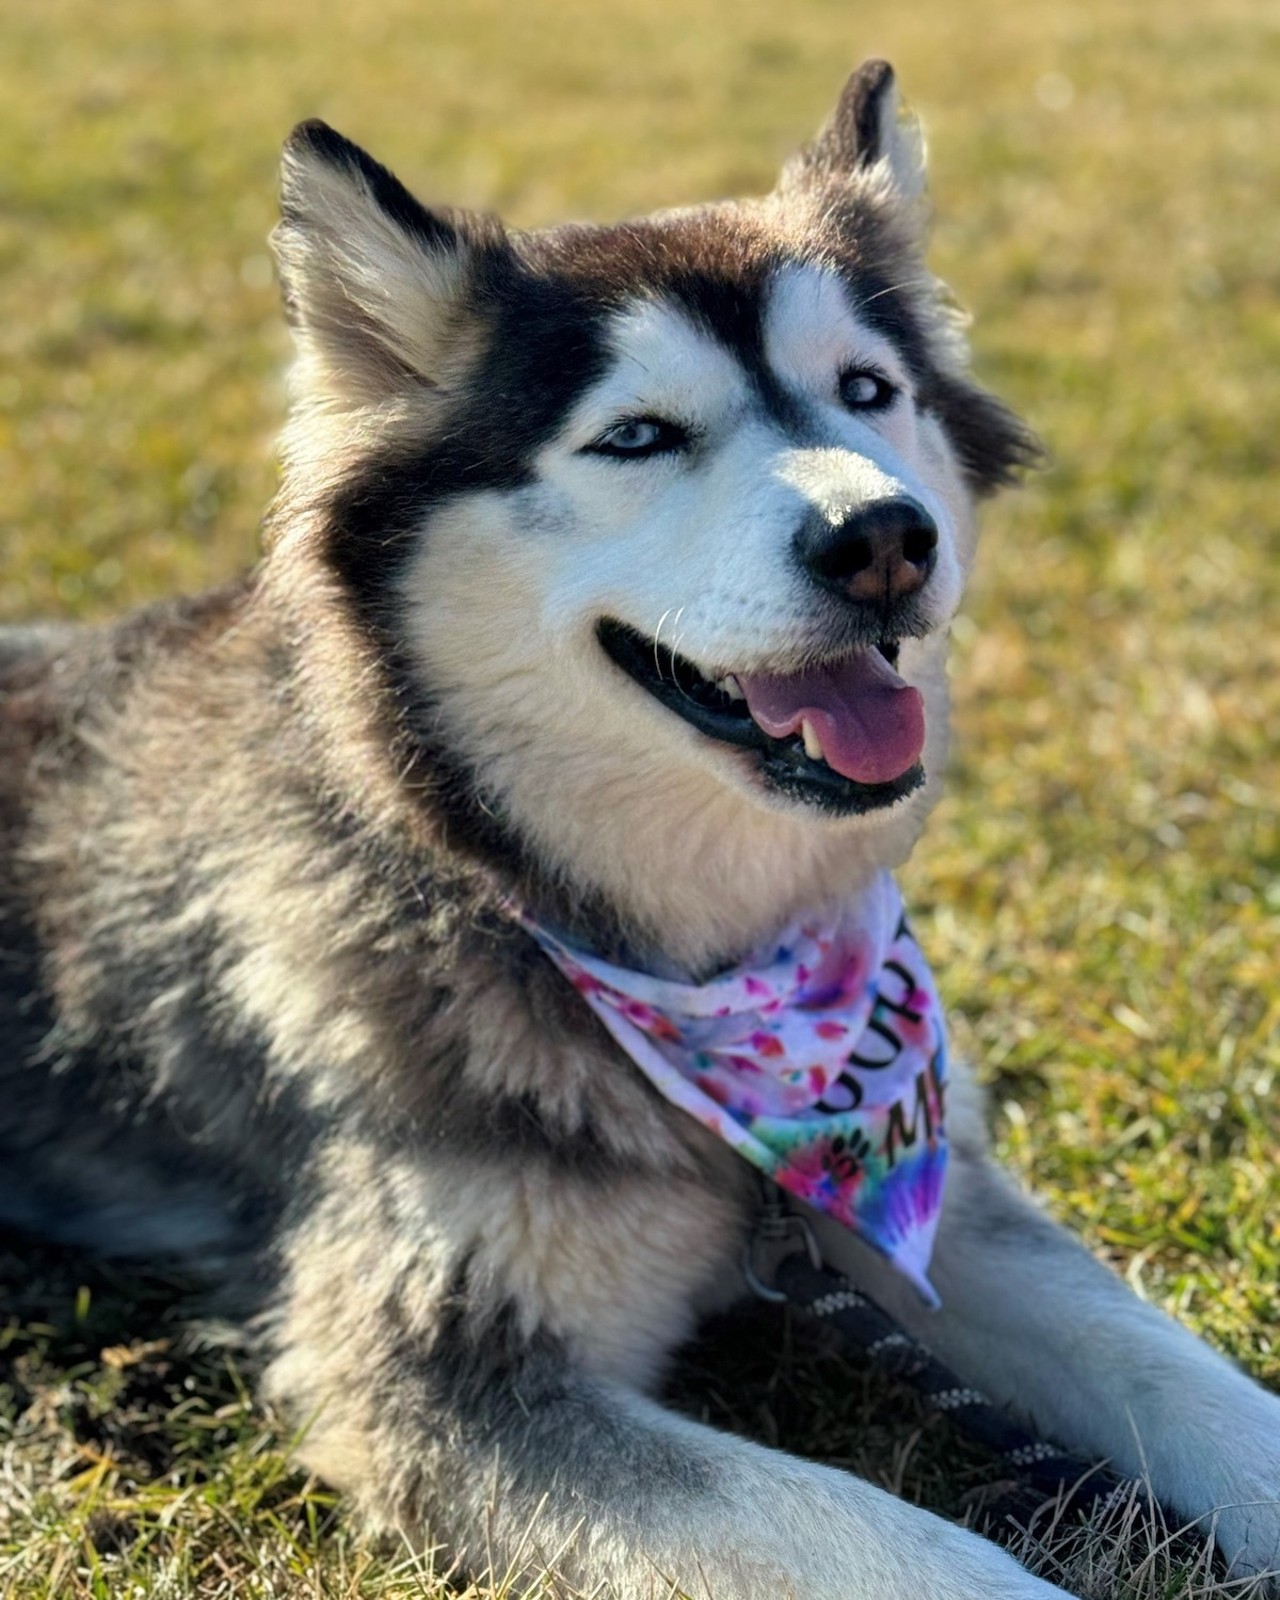 Lupe
League for Animal Welfare
“Lupe is stunning!! She is as sweet as she is beautiful. She loves a good hike or just cuddling on the couch. She will do anything as long as she can be with you.”